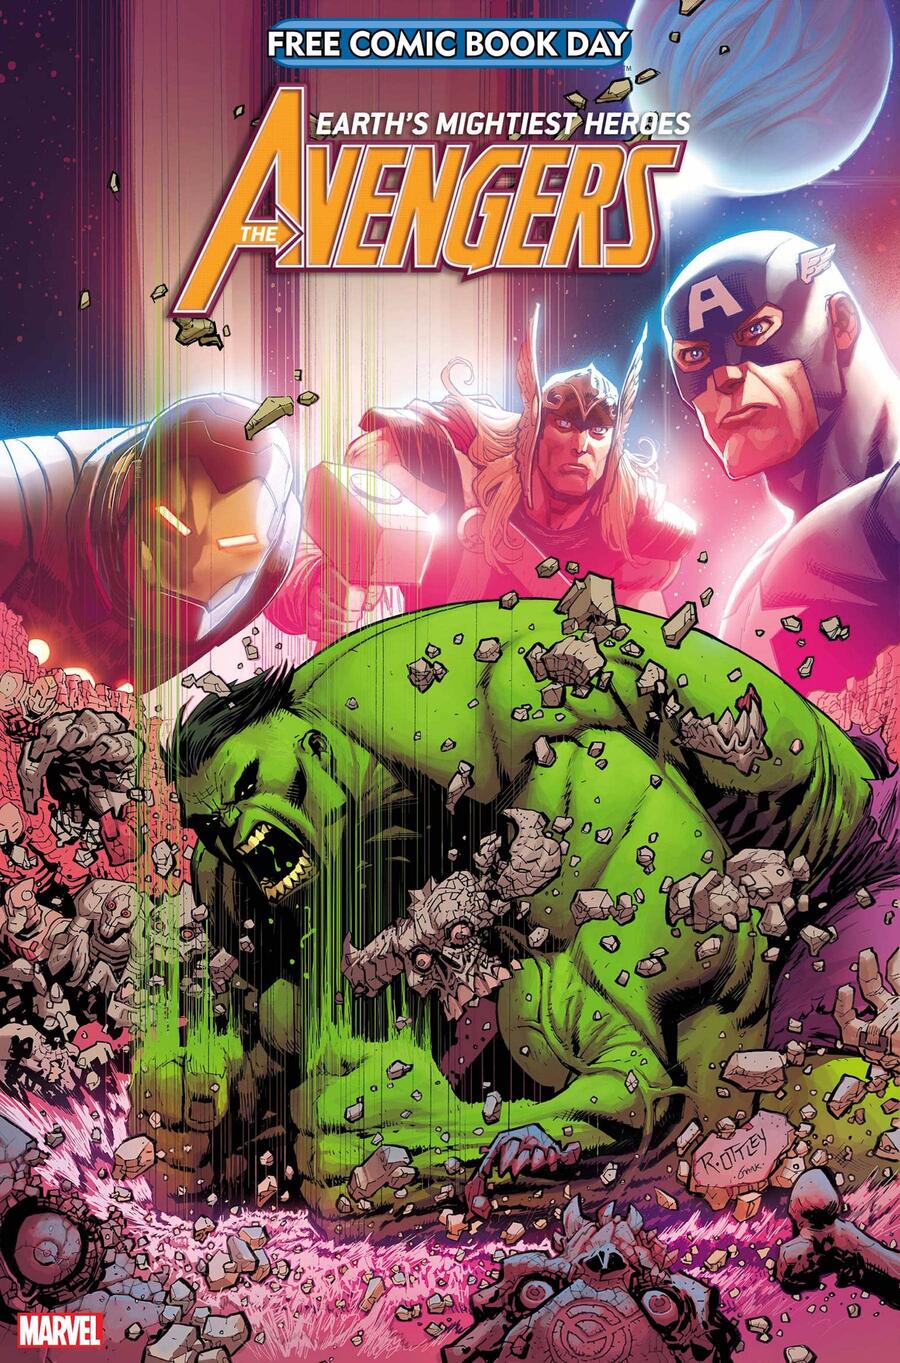 The cover for Marvel's FDCB 2021 offering featuring the Hulk smashing the ground with Iron Man, Thor, and Captain America in the background. Art by Ryan Ottley.